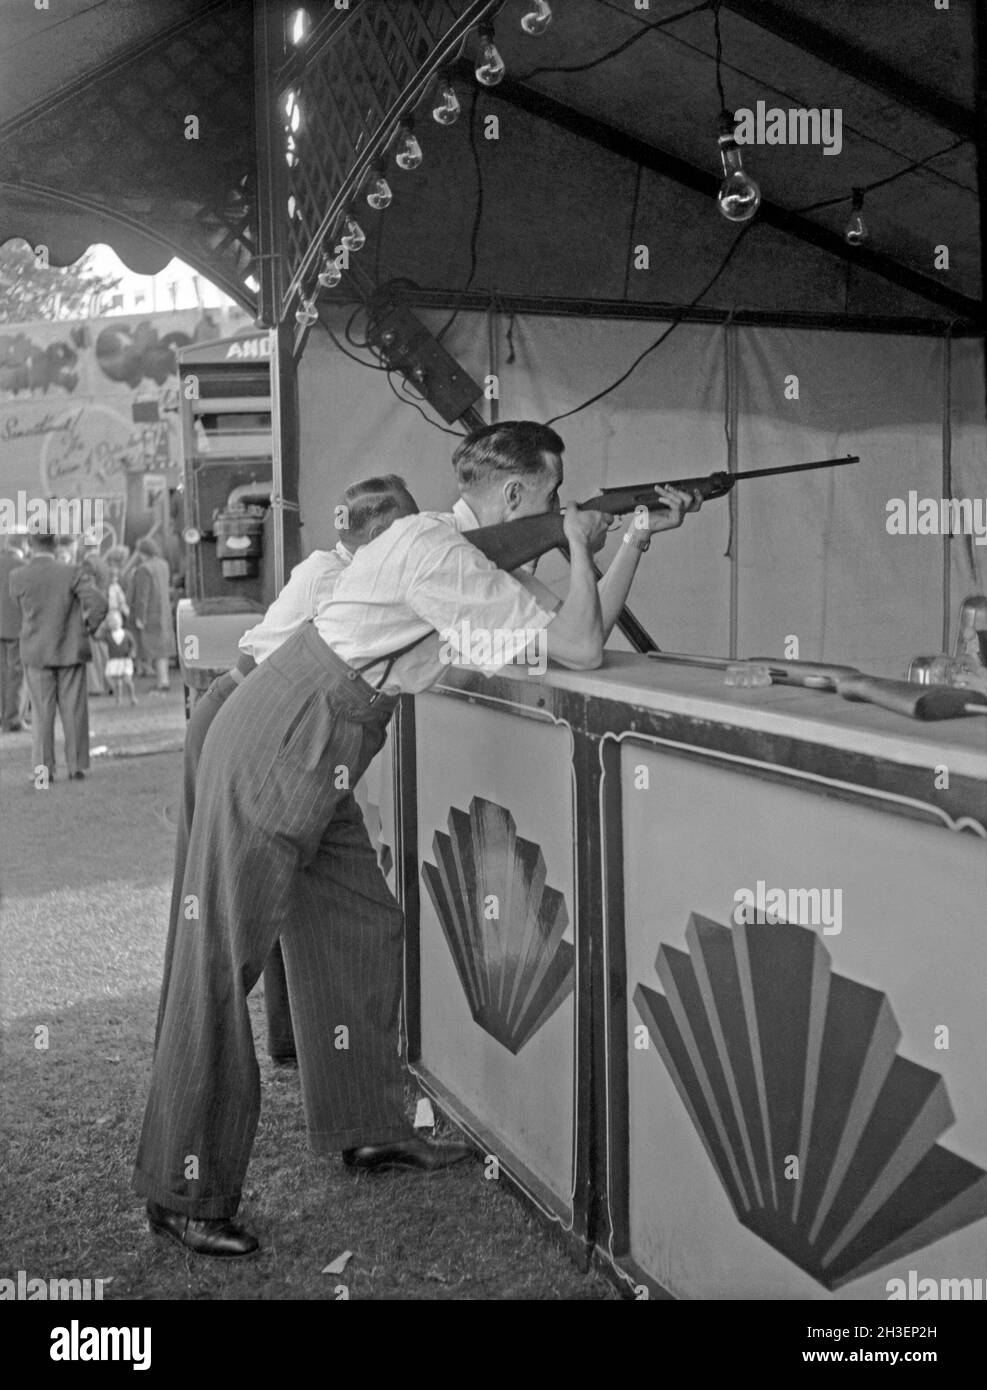 A rifle range or shooting gallery at a funfair in the UK c.1950 – here a man takes aim at a target with an air rifle. A good score or bullseye would earn a prize. Note the fairground art in the form of the ‘shell’ decorative motifs on the booth. This is taken from an amateur photographer’s black and white negative – a vintage 1950s photograph. Stock Photo